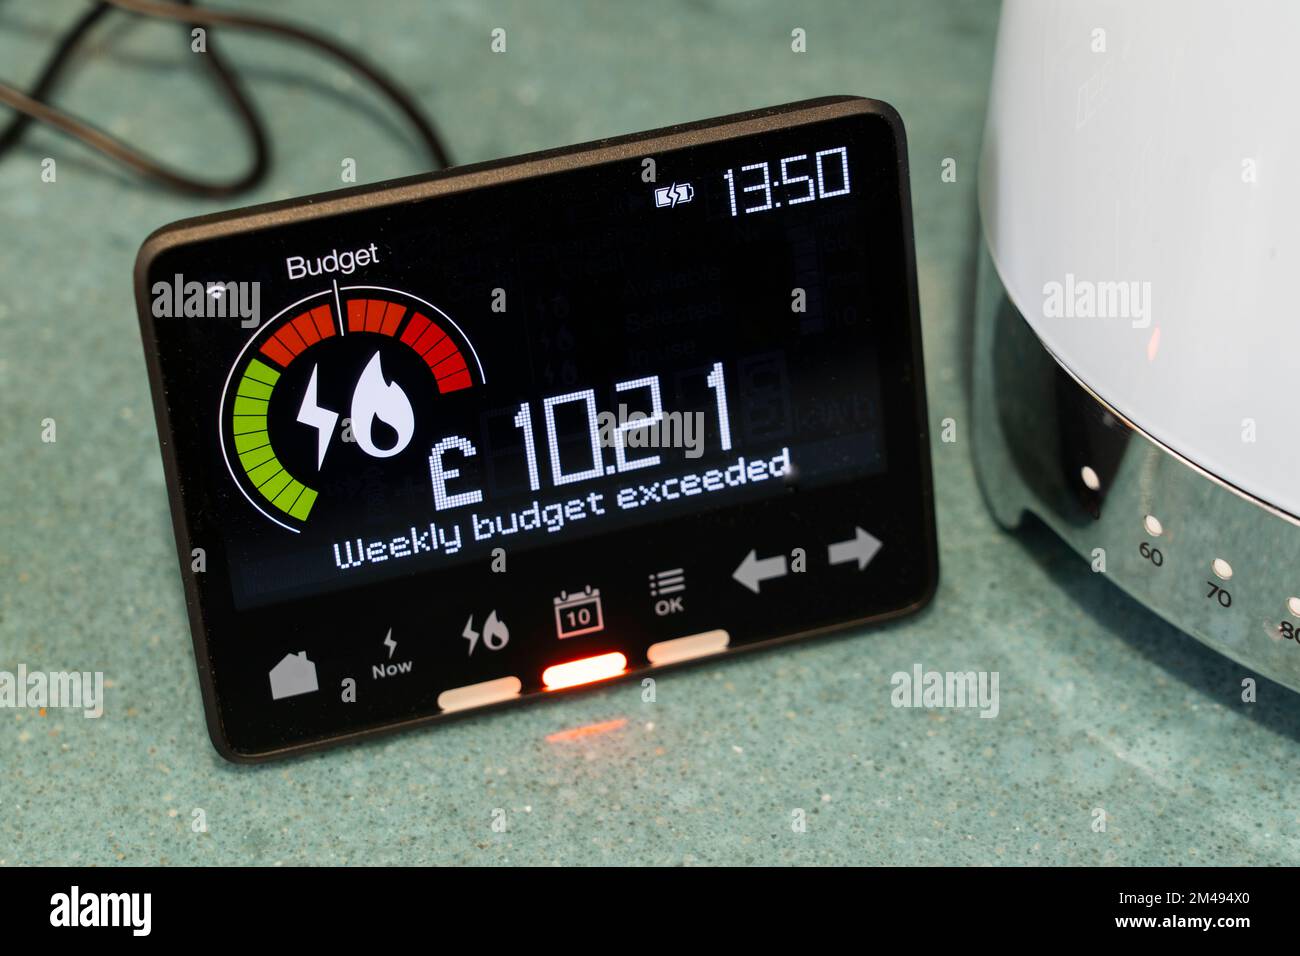 Smart energy meter showing electricity usage & that the weekly budget has been exceeded. Theme: cost of living, rising energy bills, living standards Stock Photo